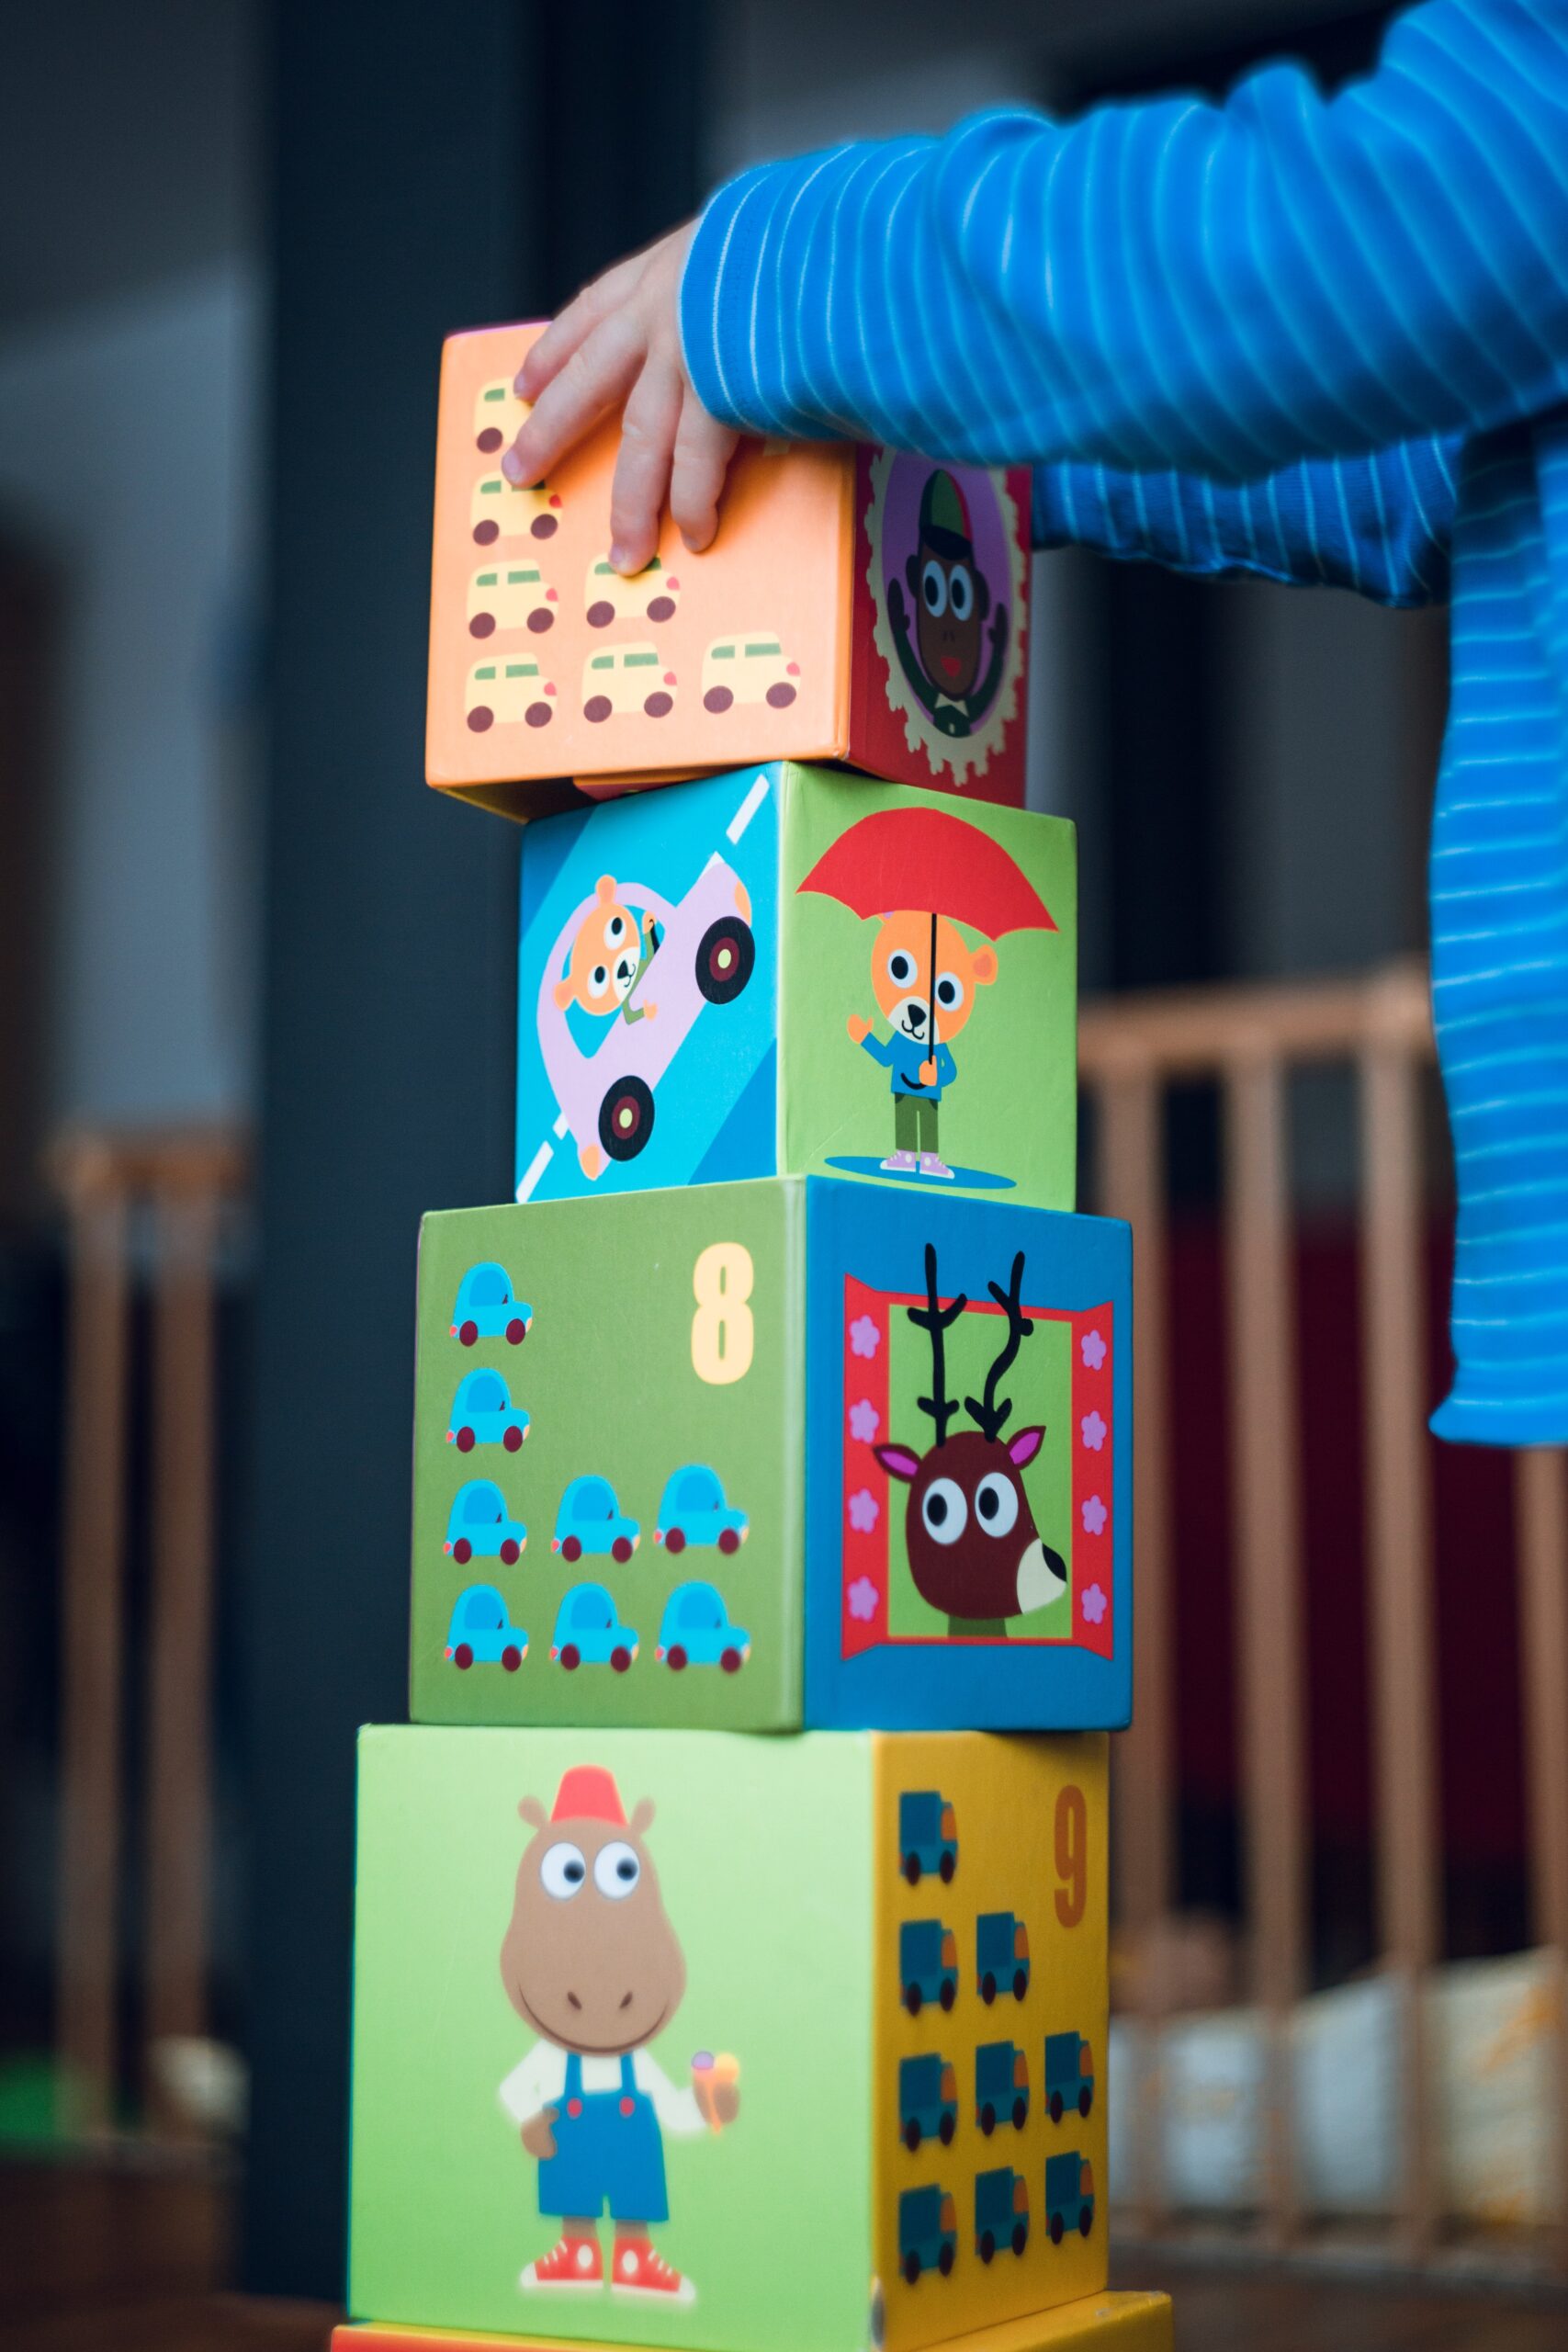 A child stacking blocks on top of each other image